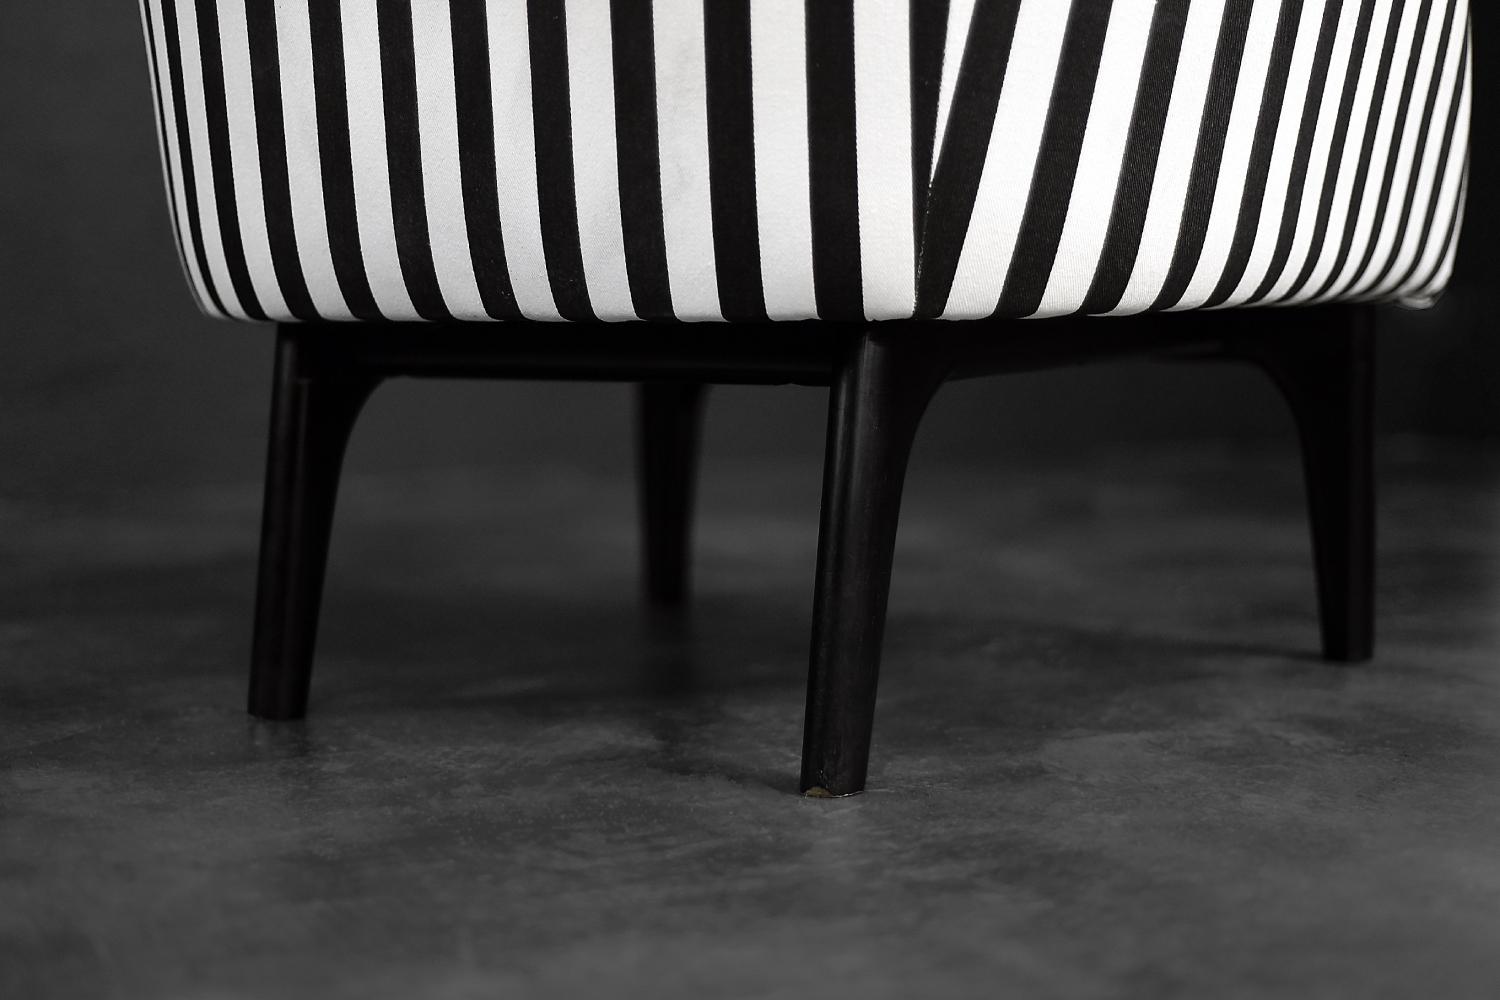 Pair of Mid-Century Scandinavian Modern Armchairs with Black&White Stripes, 1960 For Sale 13